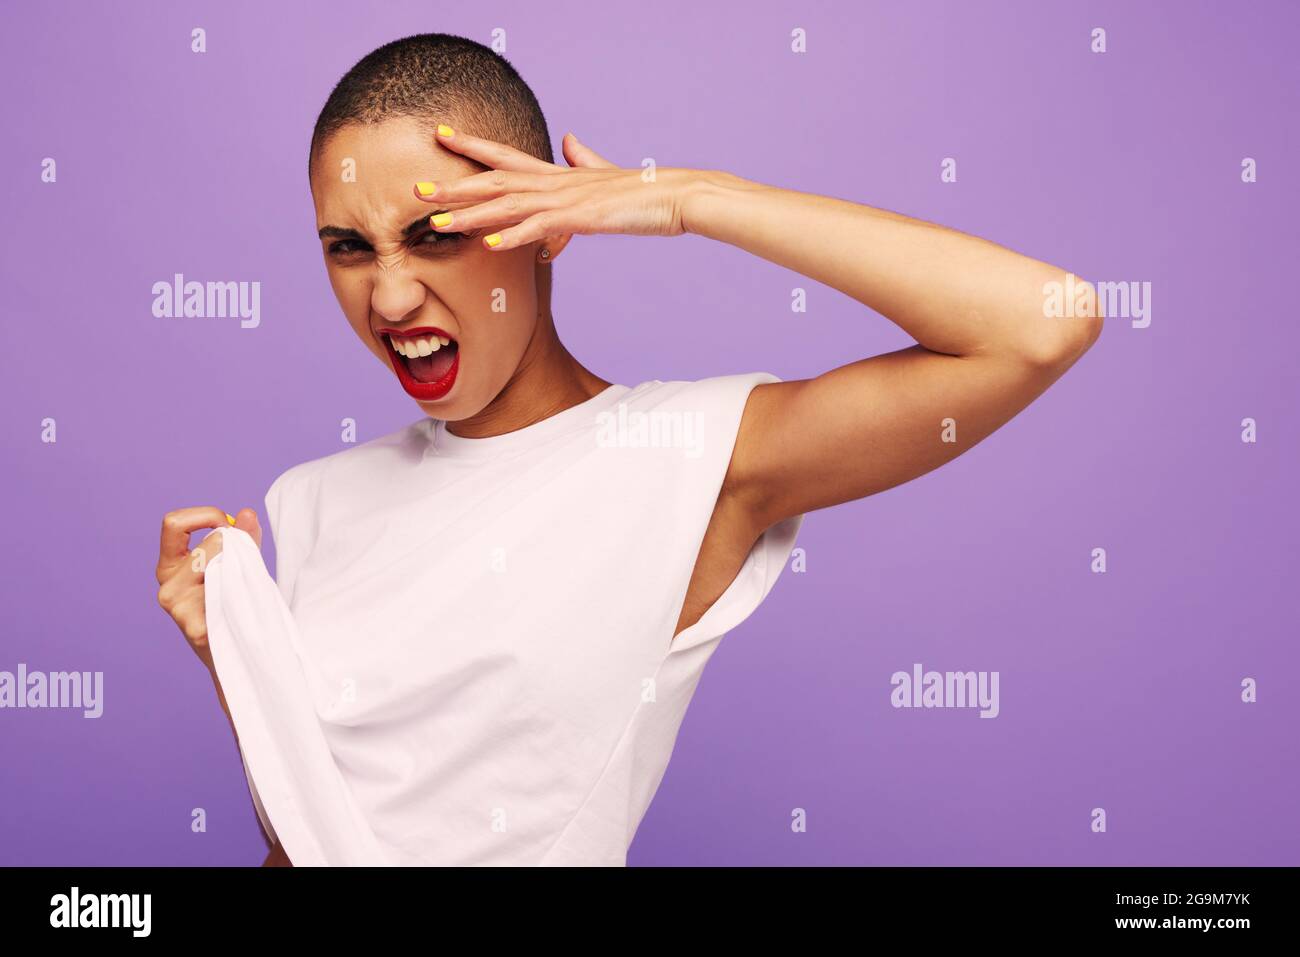 Portrait of a stunning woman with short hair. Female model in while t-shirt looking at camera with cool expression on purple background. Stock Photo